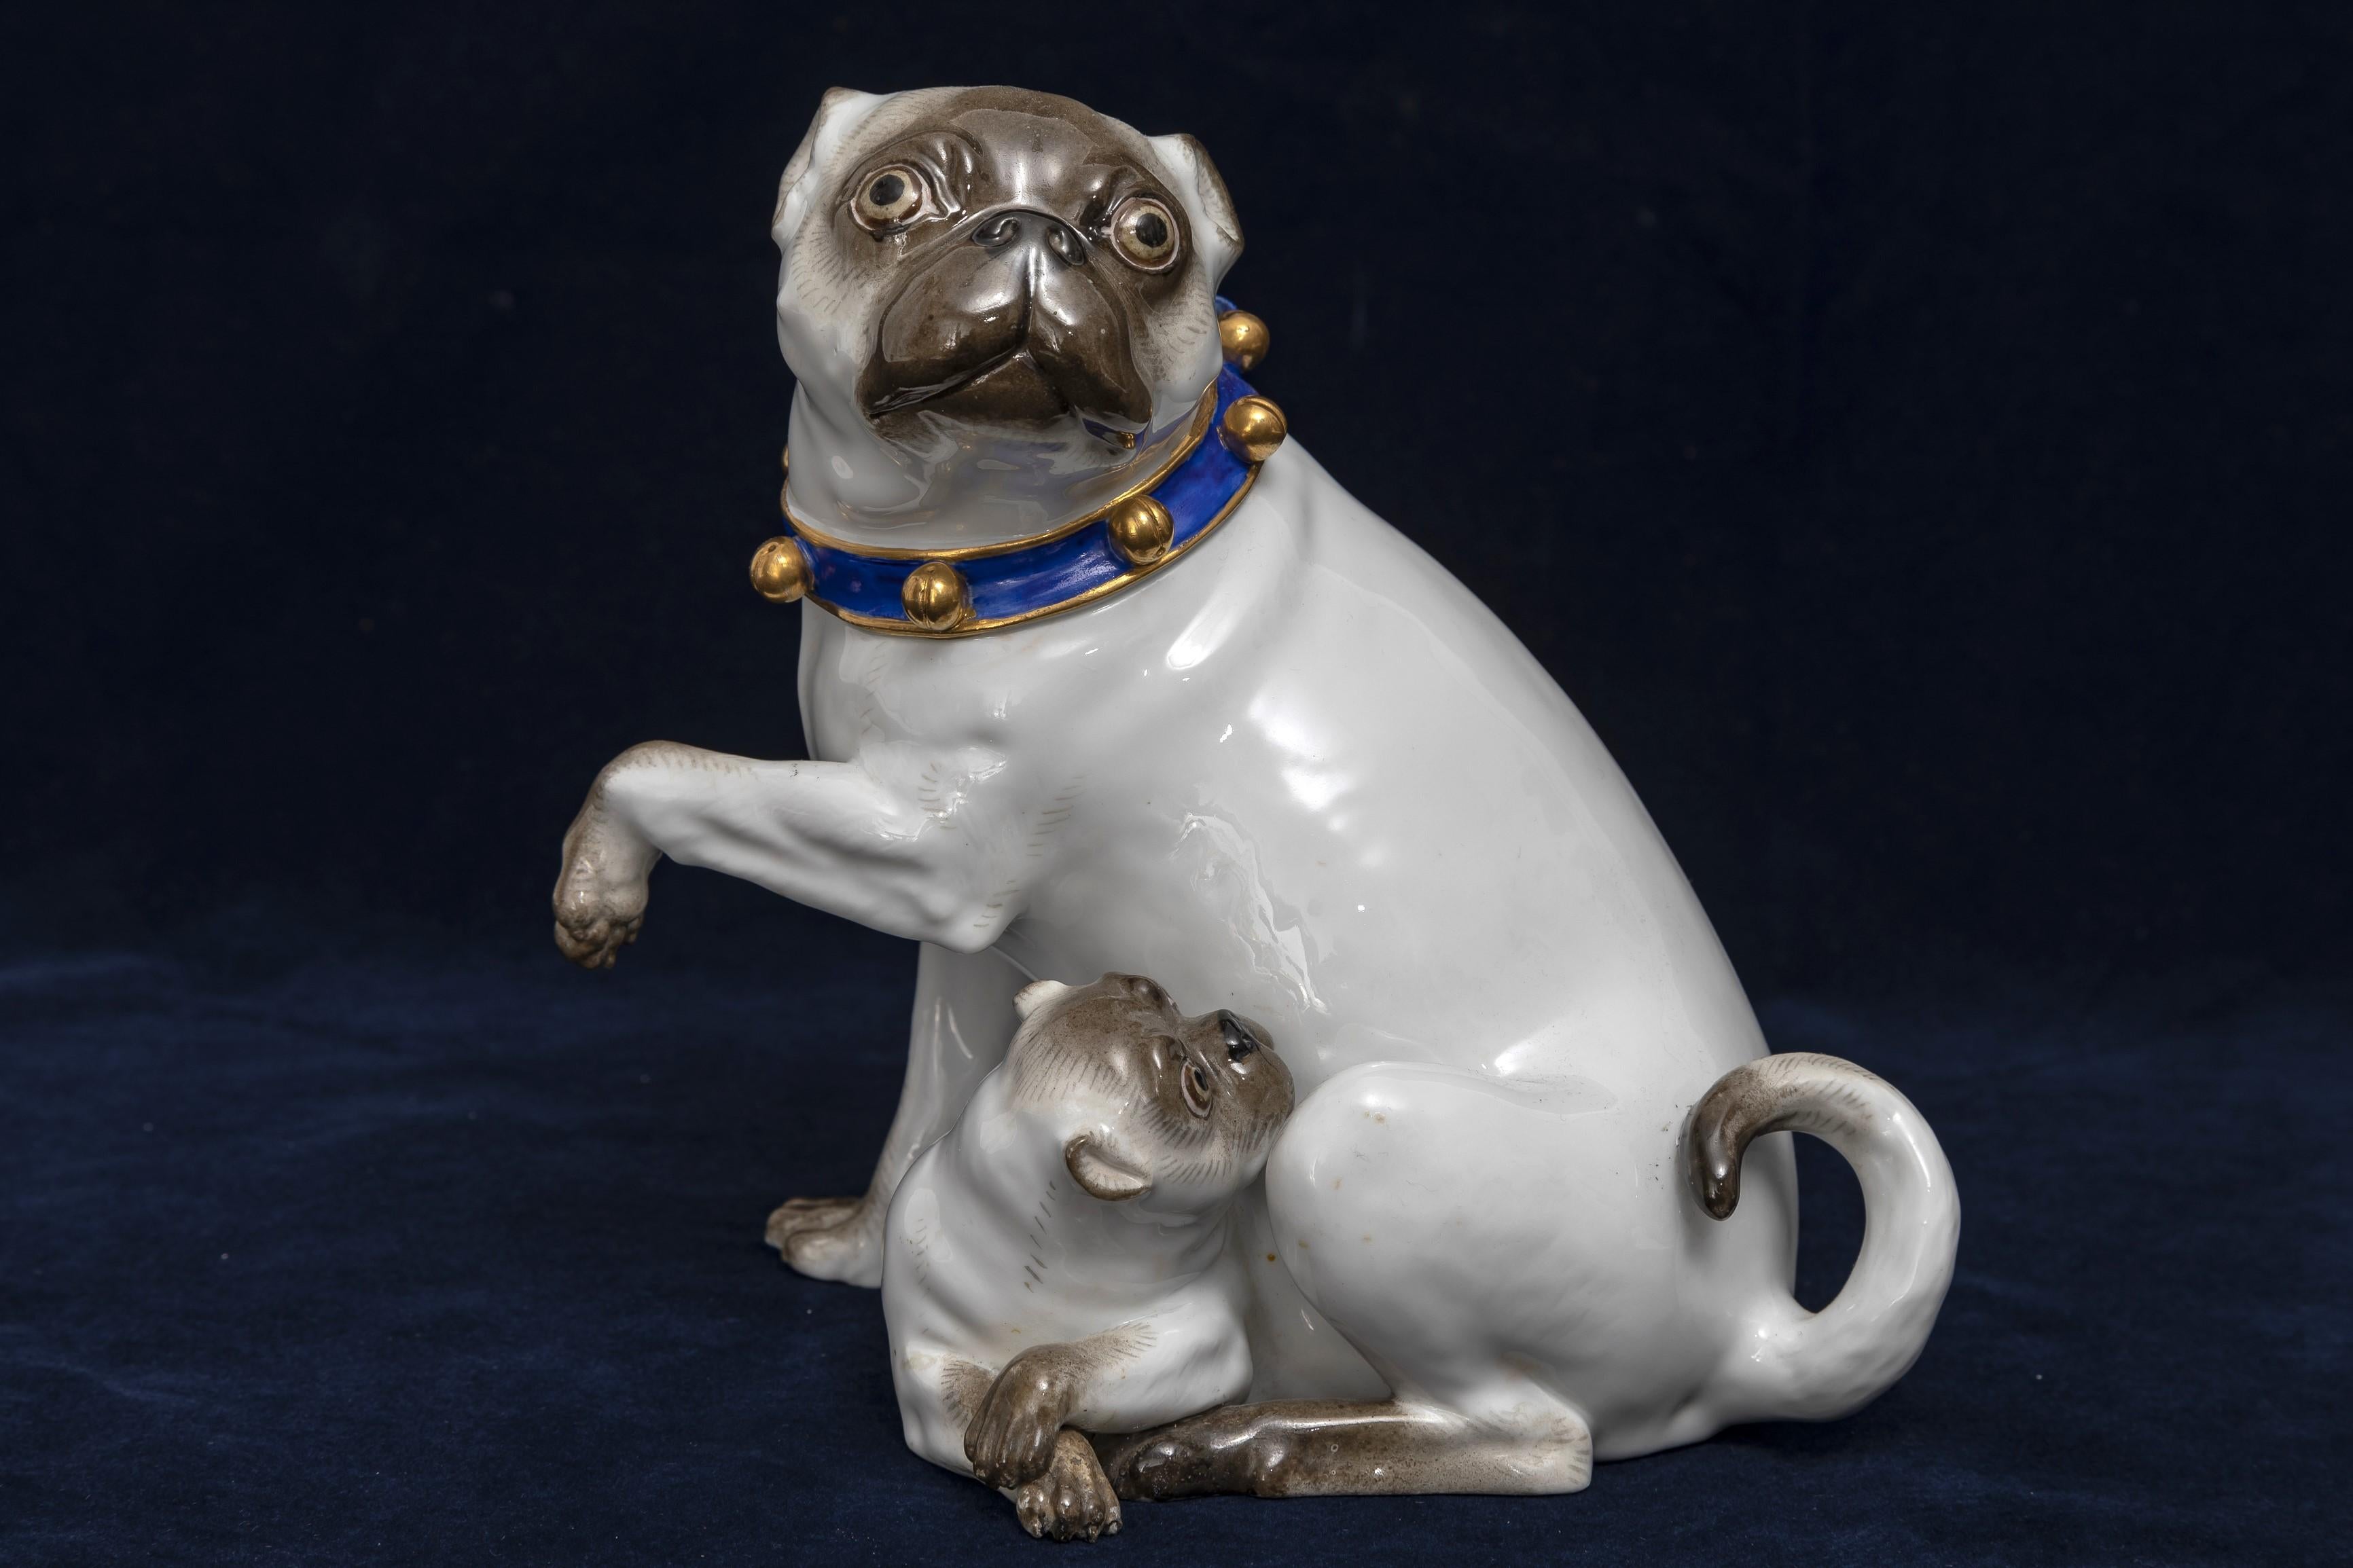 A Large 19th Century Meissen Porcelain Figure of a White Pug Mother and Child with Gilt Bells on a Blue Collar.  This large model is very rare to find in this quality, condition, and size. The subject of the larger pug mother with her child is